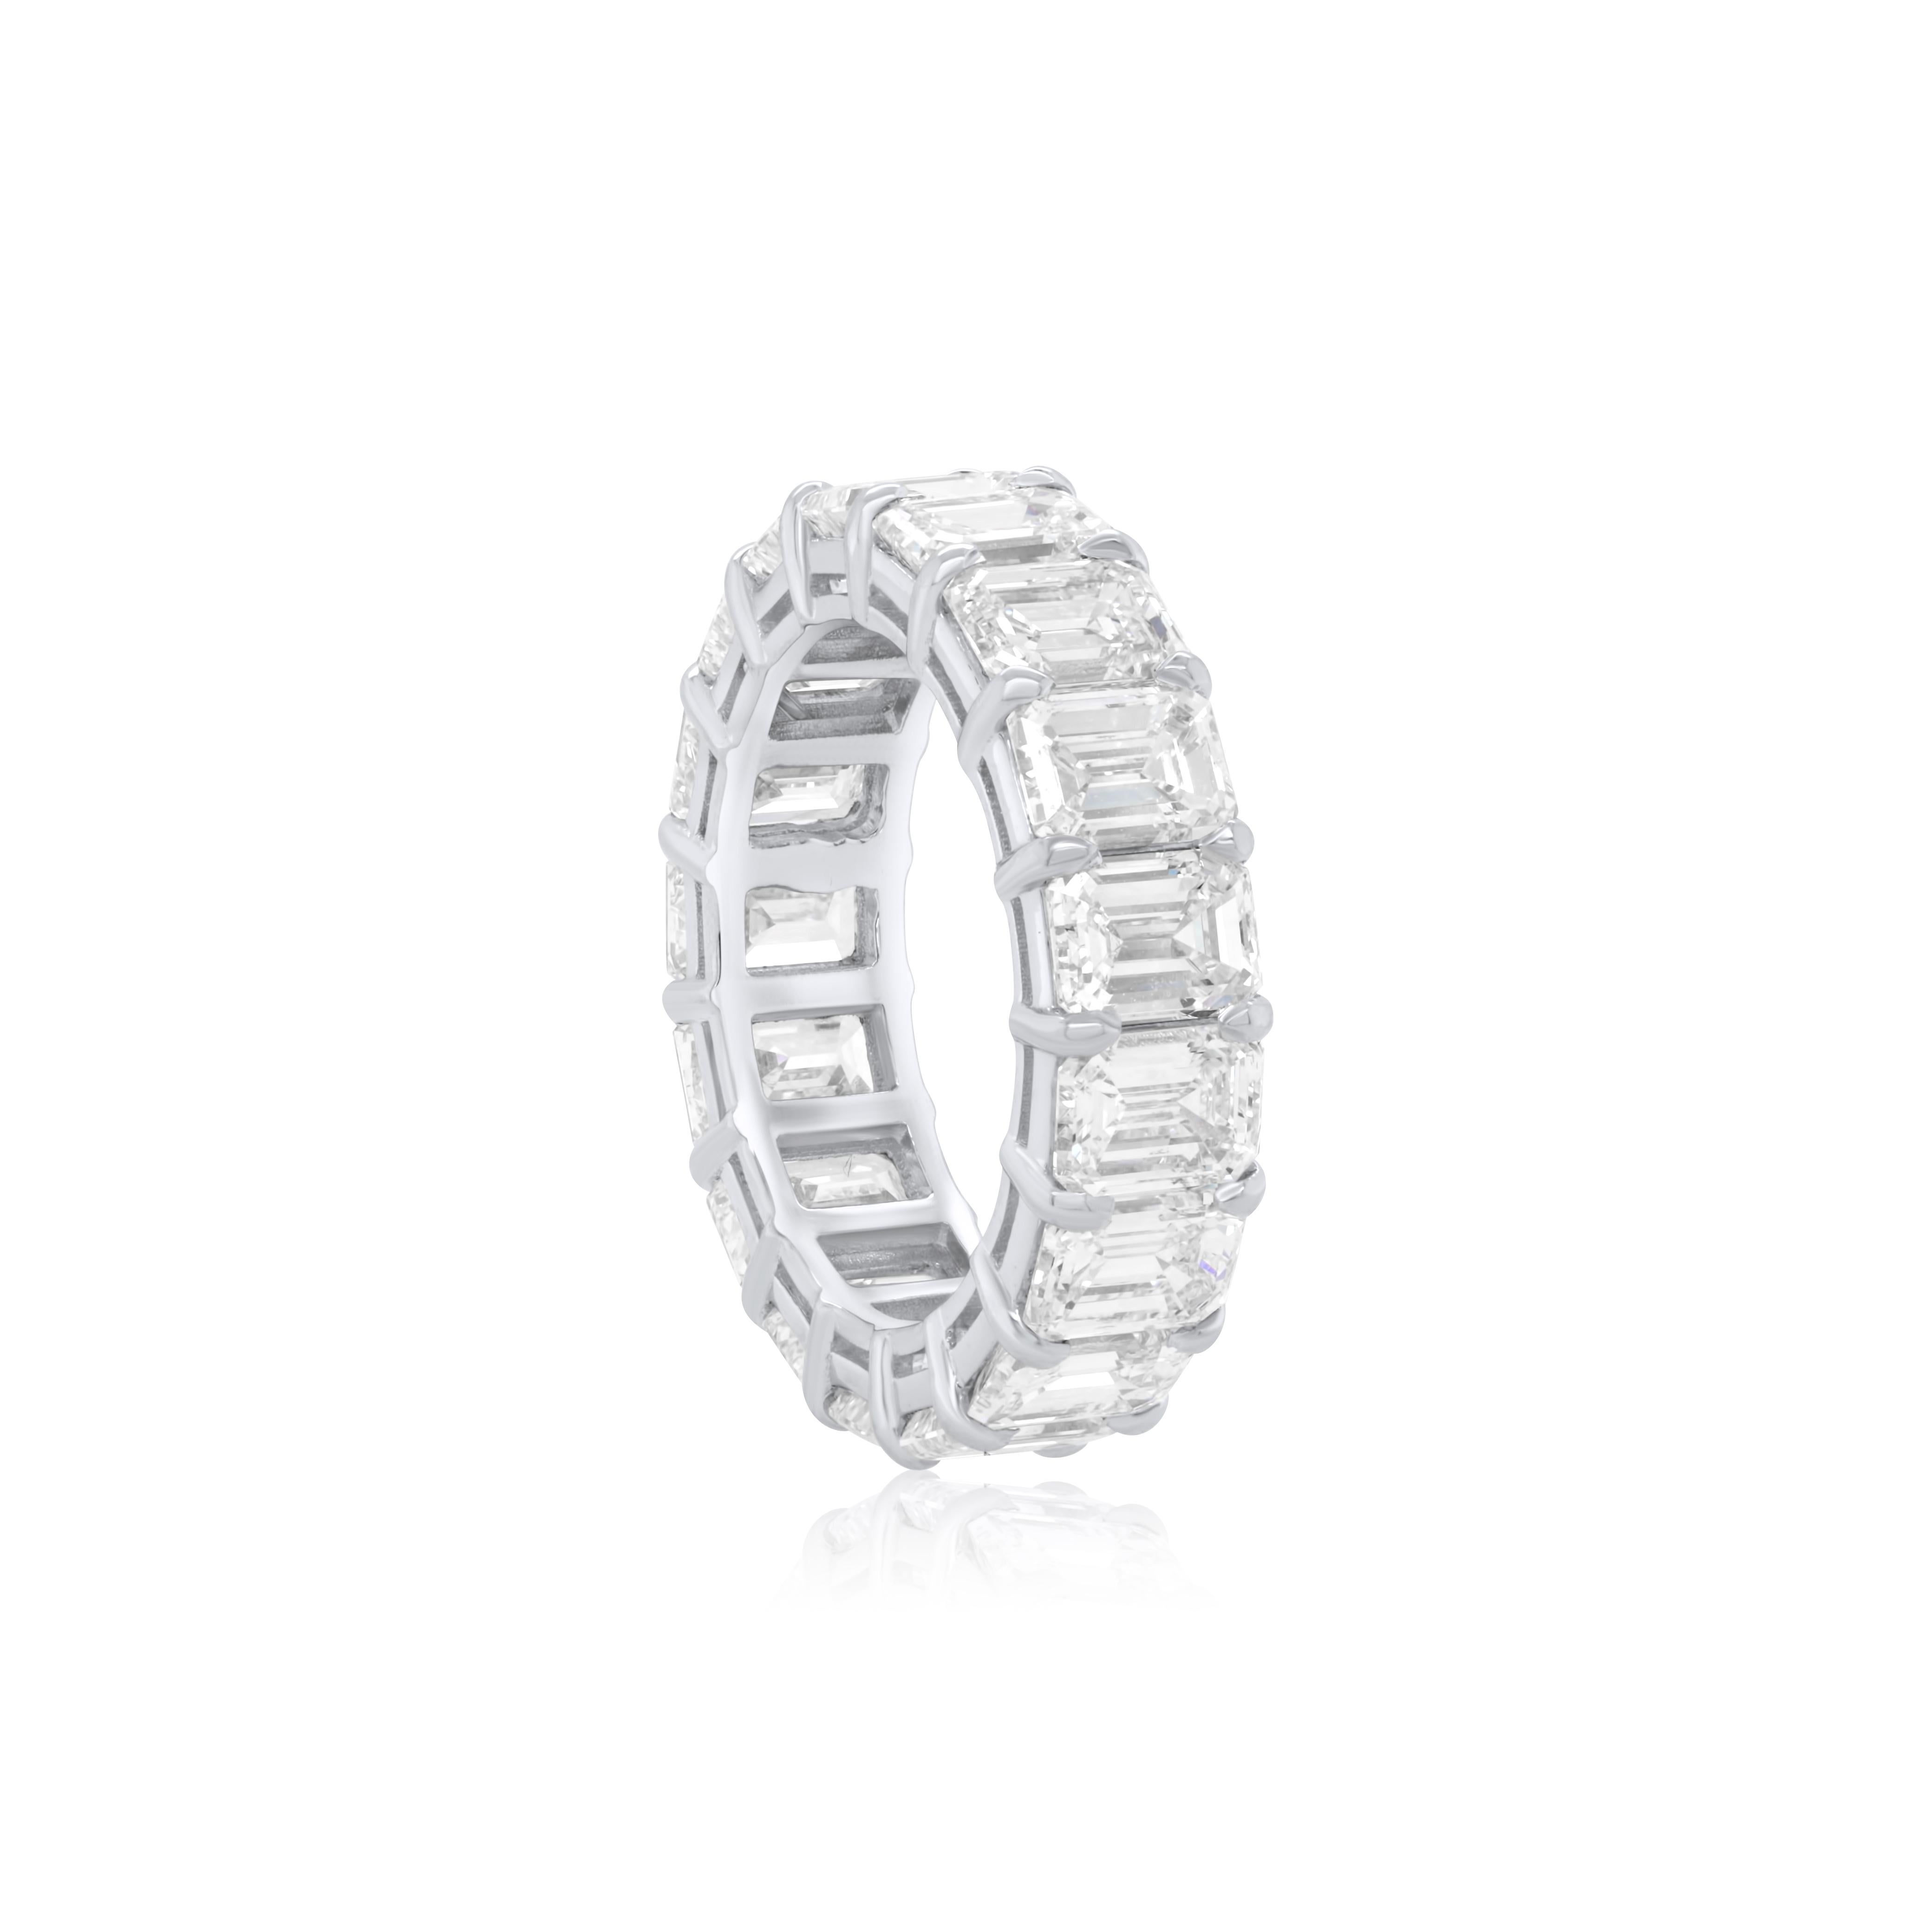 18KT WHITE GOLD WEDDING BAND 3.65CTS EMERALD CUT DIAMONDS, 25STONE
Diana M. is a leading supplier of top-quality fine jewelry for over 35 years.
Diana M is one-stop shop for all your jewelry shopping, carrying line of diamond rings, earrings,